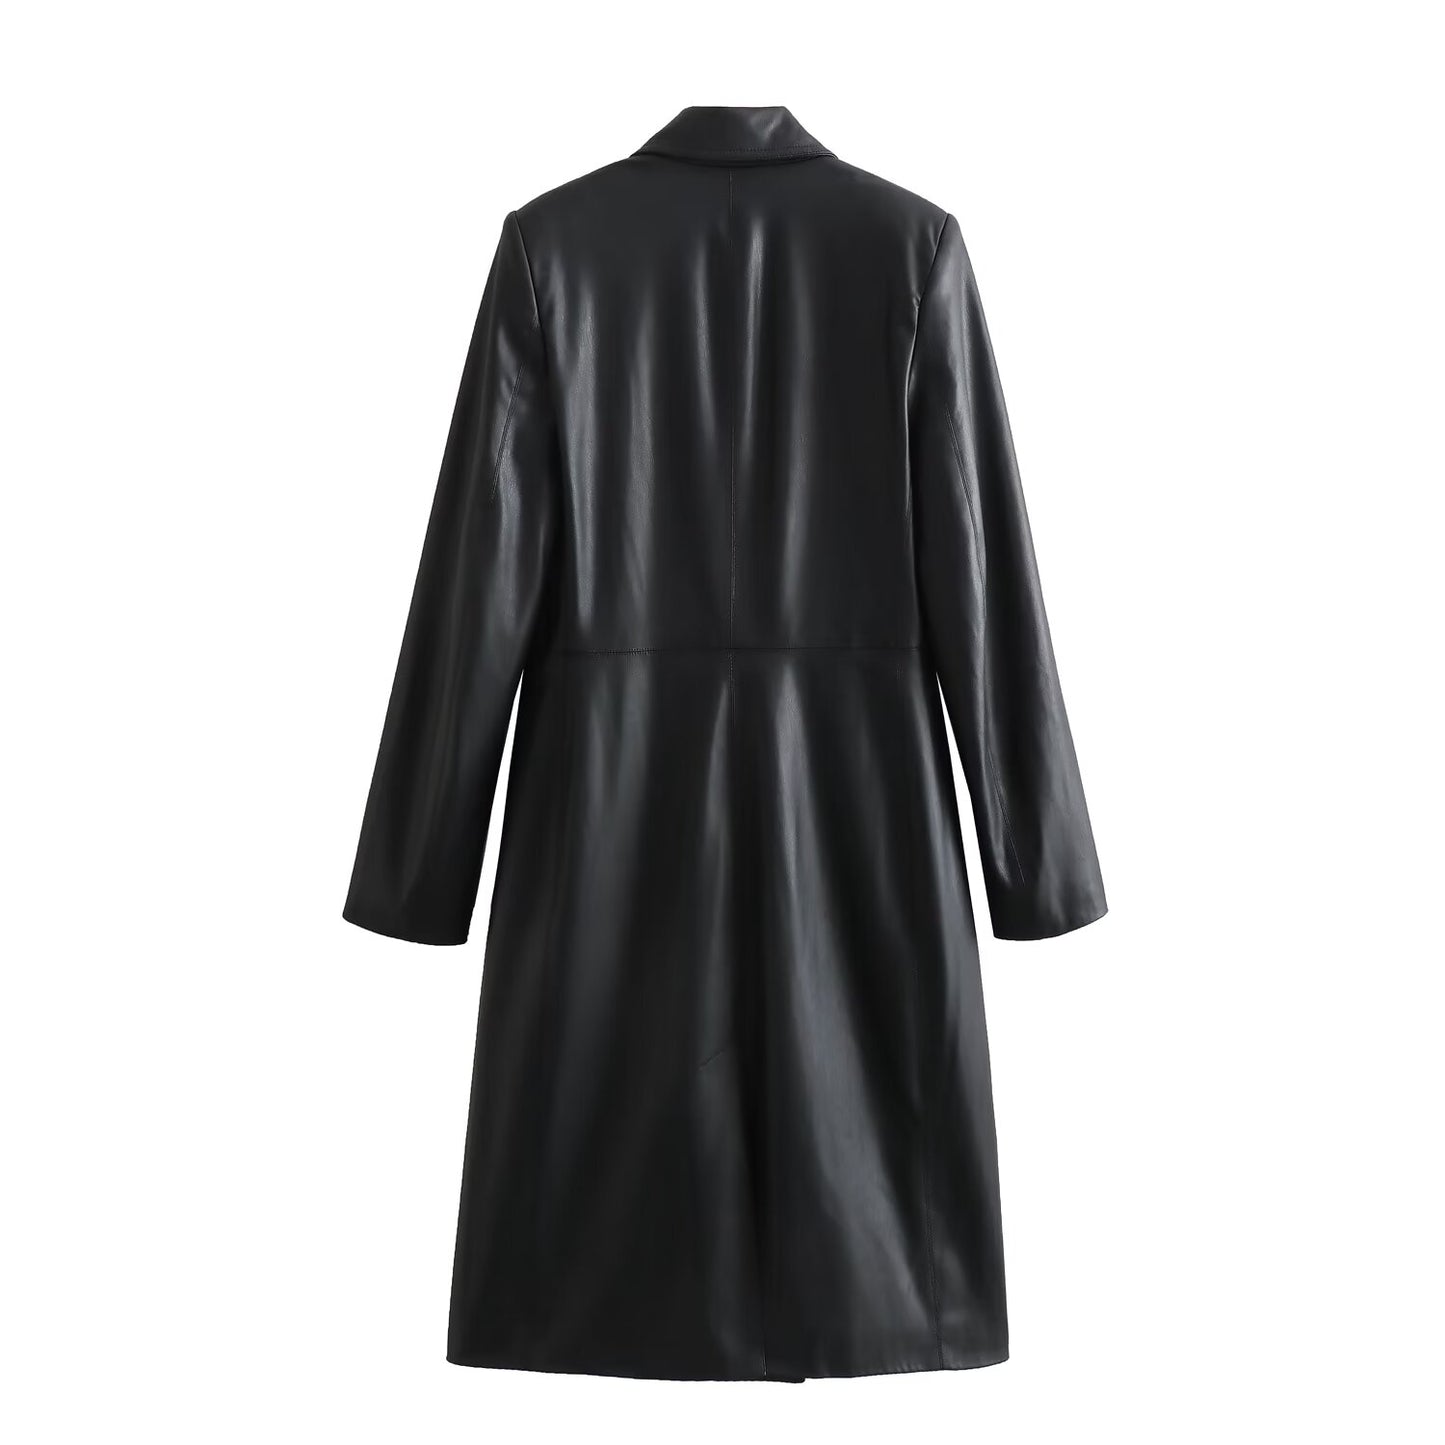 Winter Women Clothing Fashionable All Match Collar Faux Leather Mid Length Coat